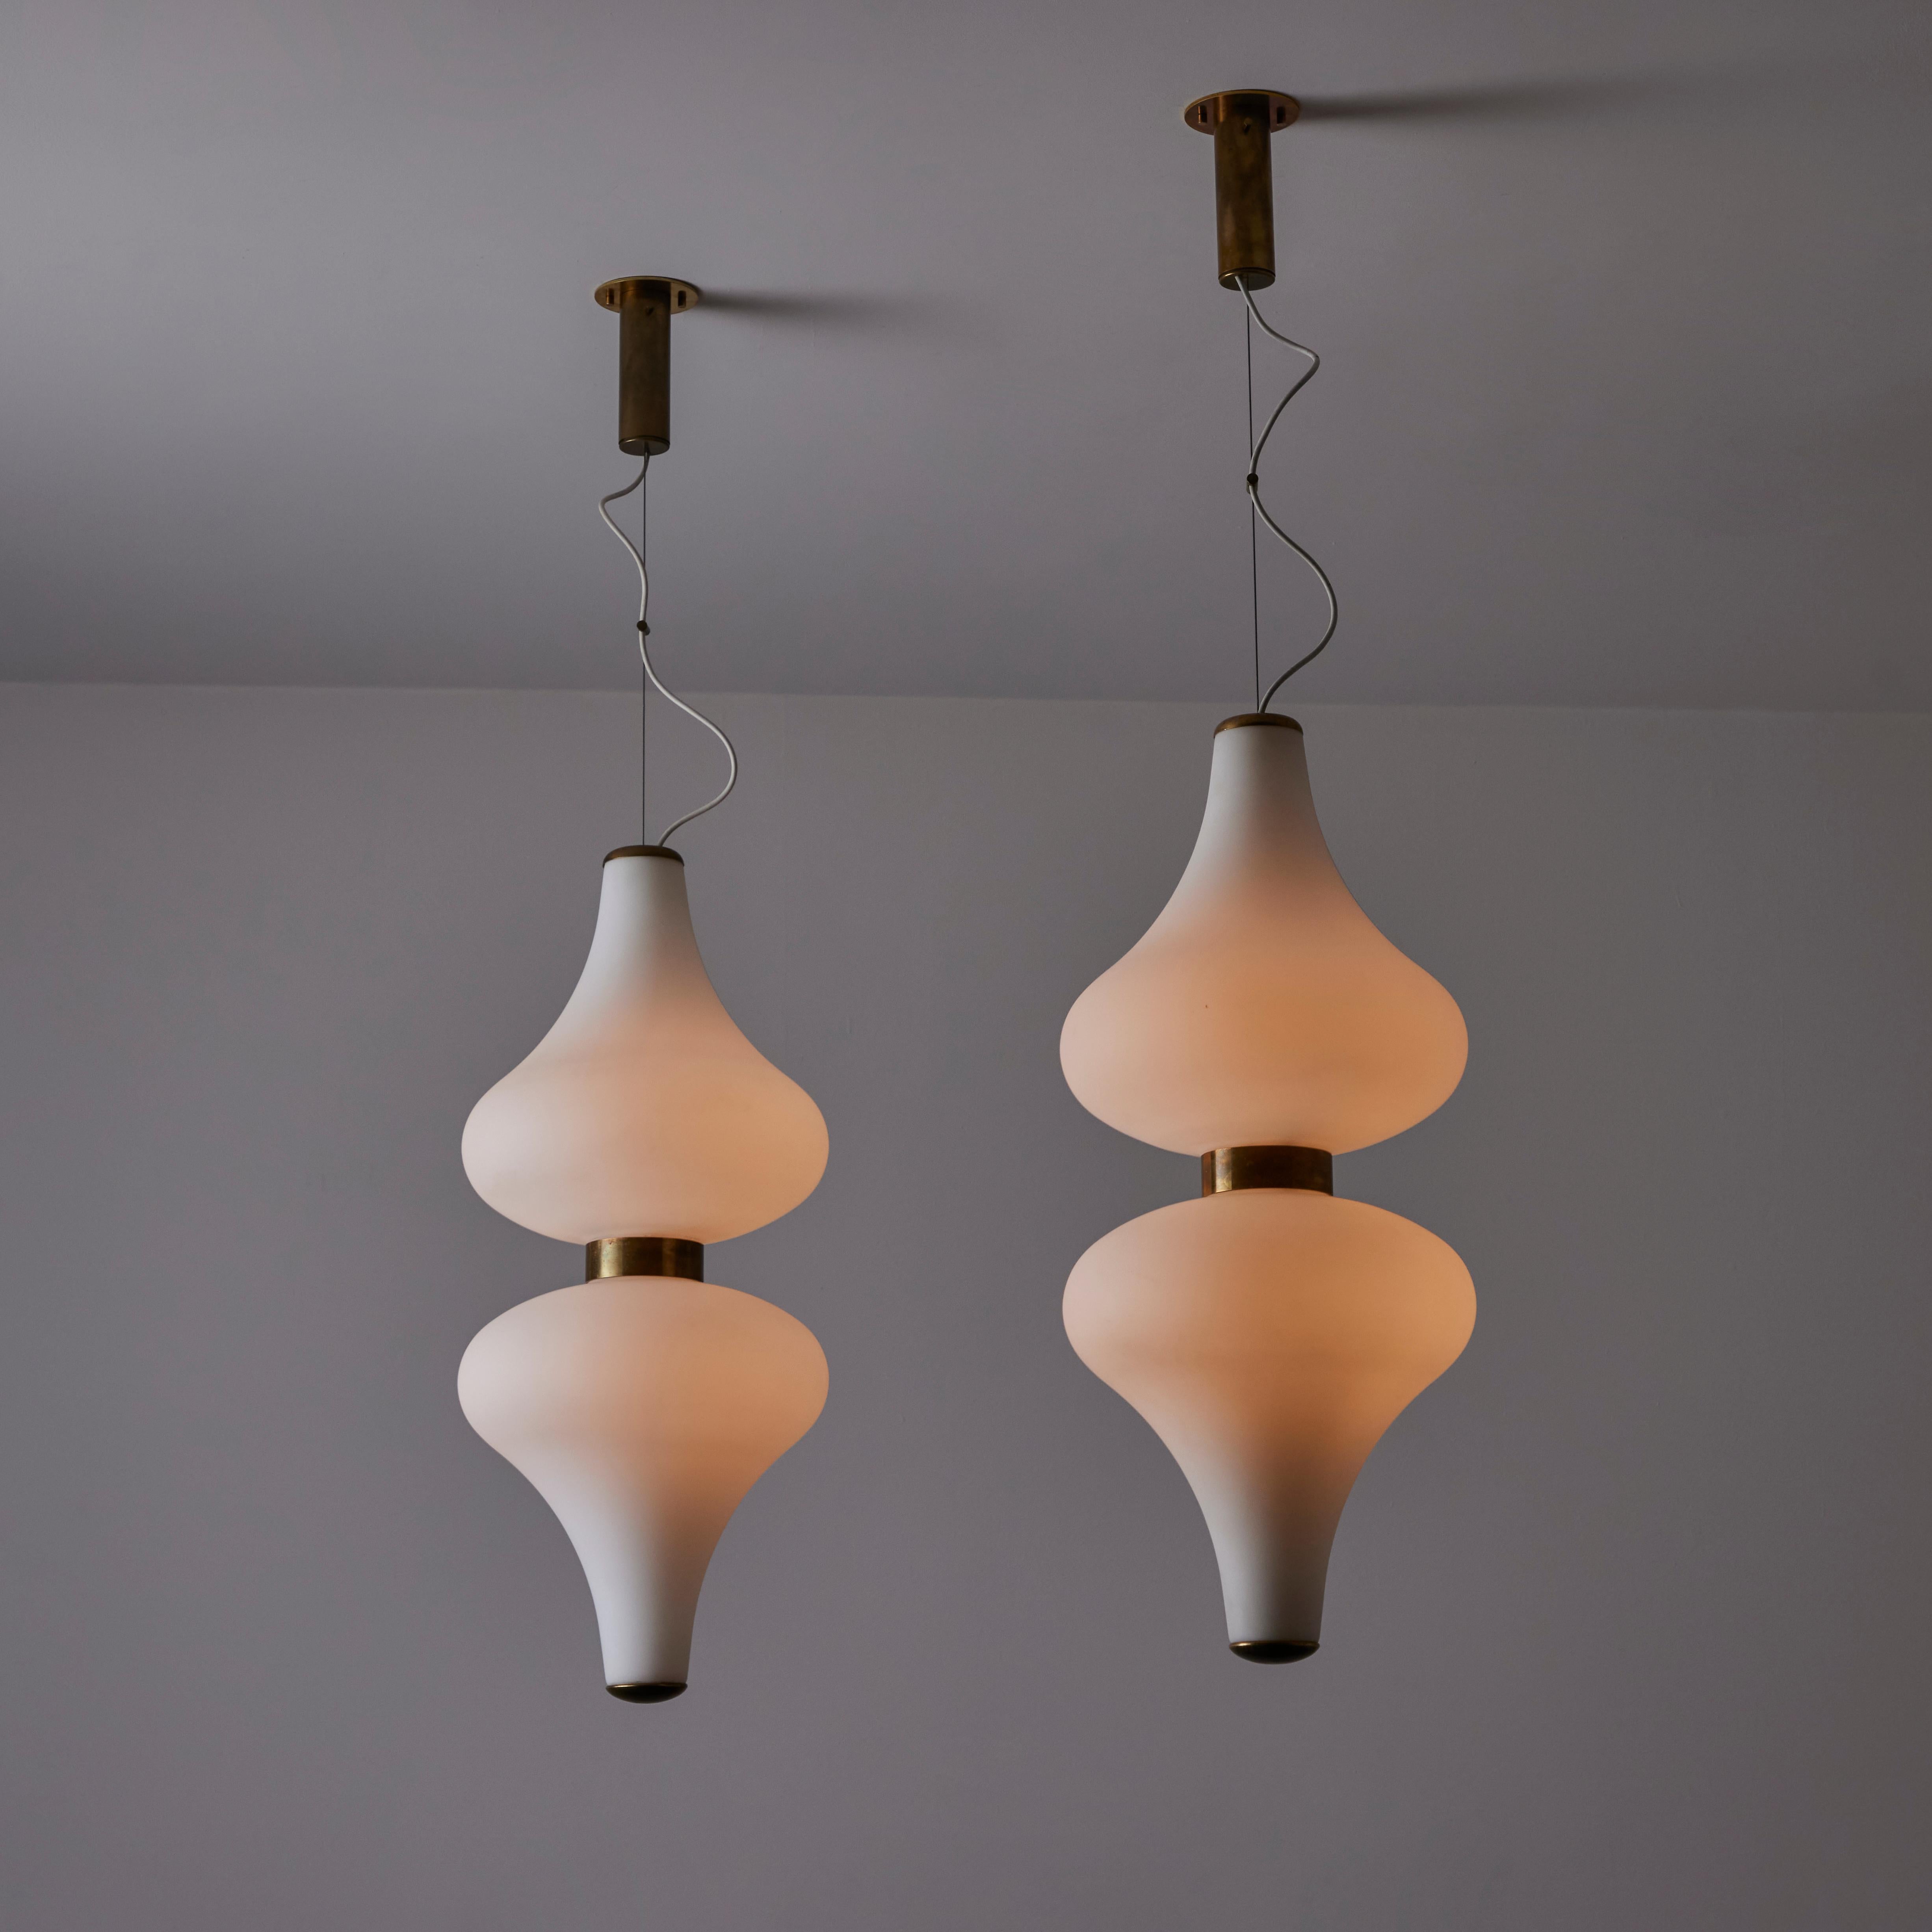 Rare Large Suspension Light by Stilnovo. Designed and manufactured in Italy, circa the 1960s. This rare double-sided pendant by Stilnovo features a stunning 360-degree tear drop milk glass shade on both sides of a circular brass clasp. We recommend